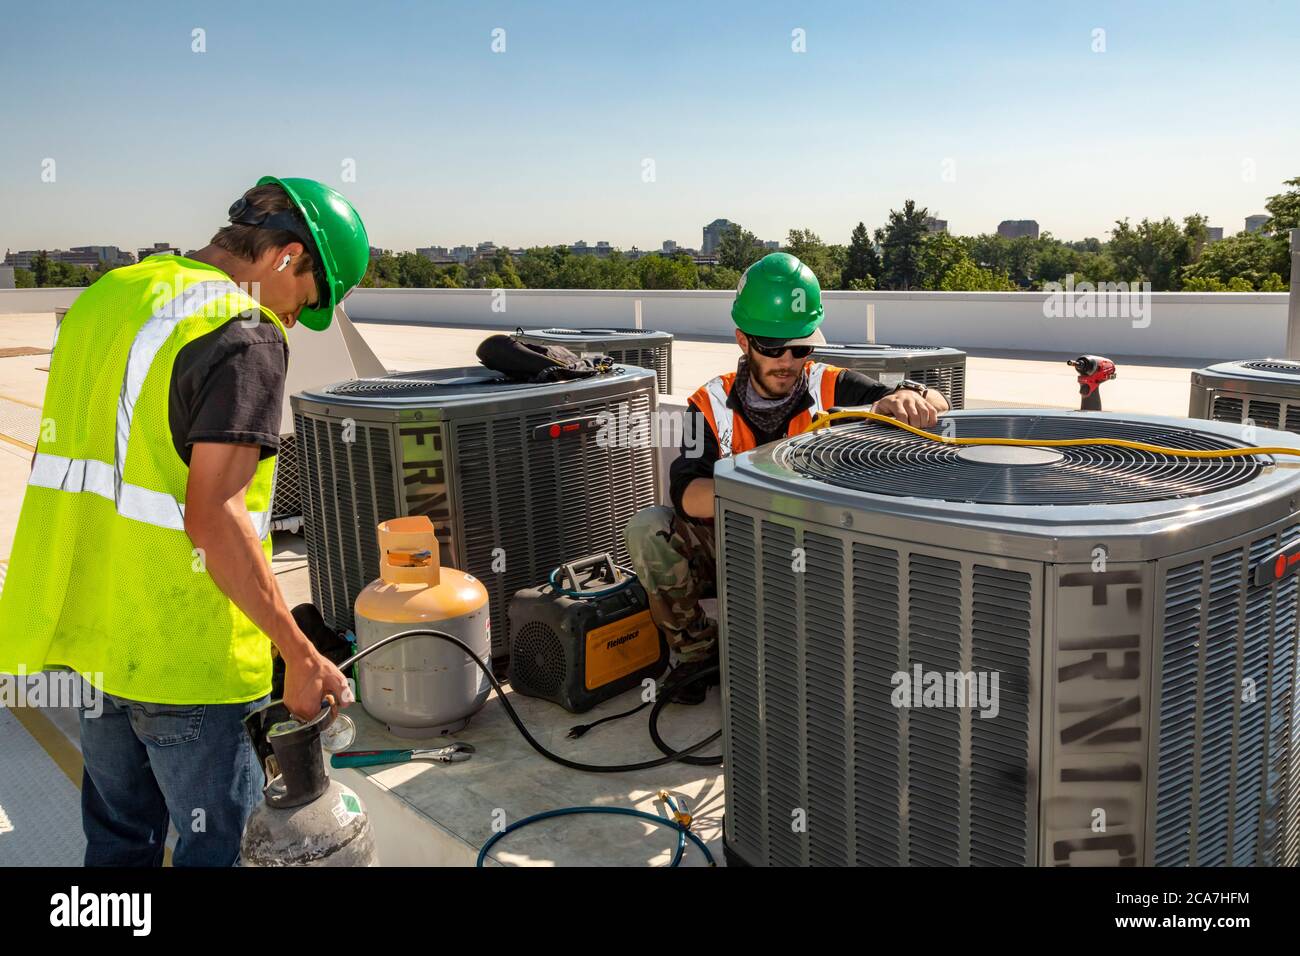 Denver, Colorado - Technicians work on the air conditioning system on the roof of an affordable housing building under construction. Stock Photo